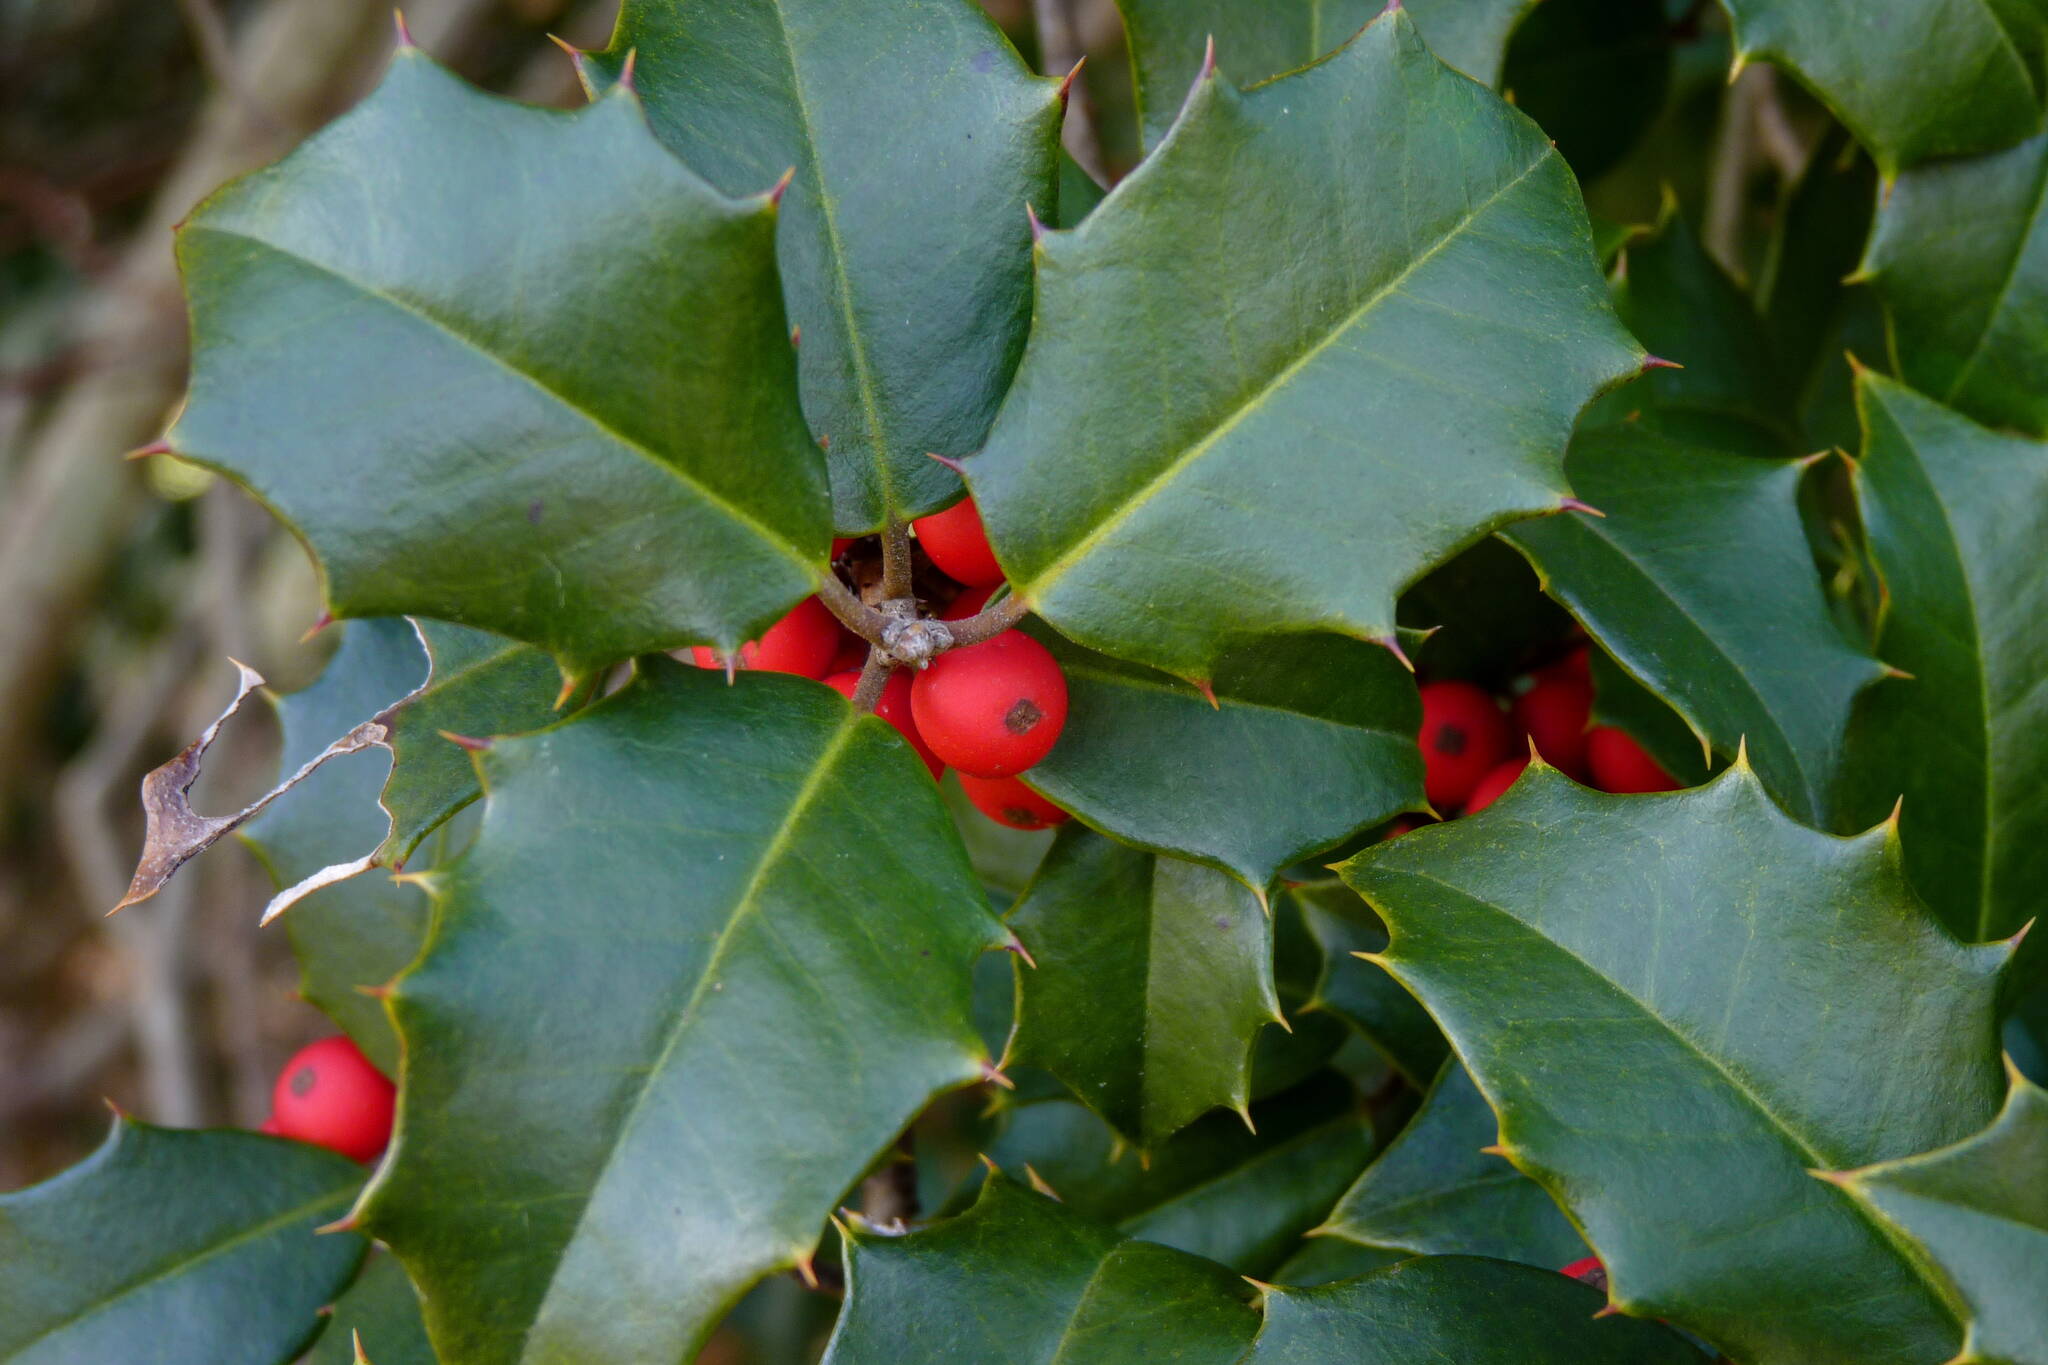 This December 2013 photo available under a Creative Commons license shows holly berries and leaves. A study of European holly in Spain showed that leaf browsing by mammals induces an increase of prickliness of the leaves. (Dendroica Cerulea / Flickr)